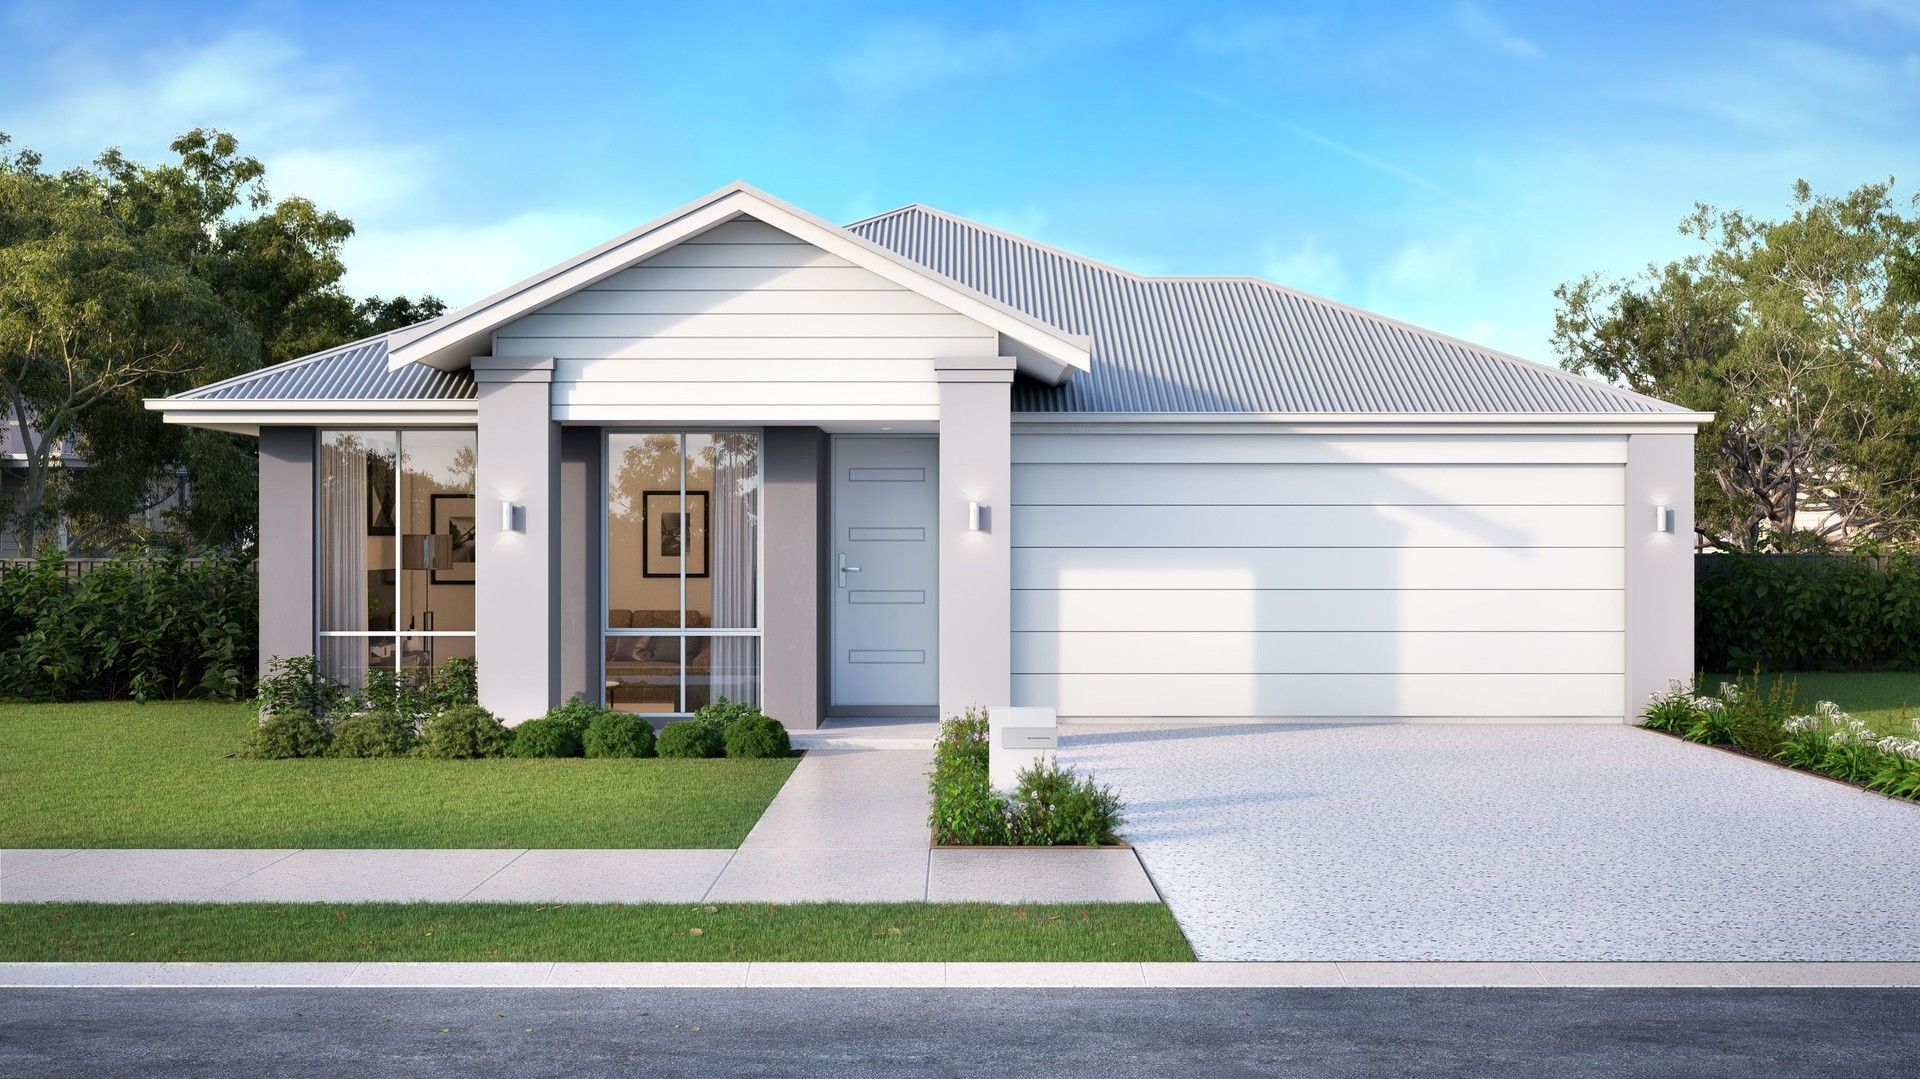 4 bedrooms New House & Land in 1587 Destino Loop SOUTHERN RIVER WA, 6110